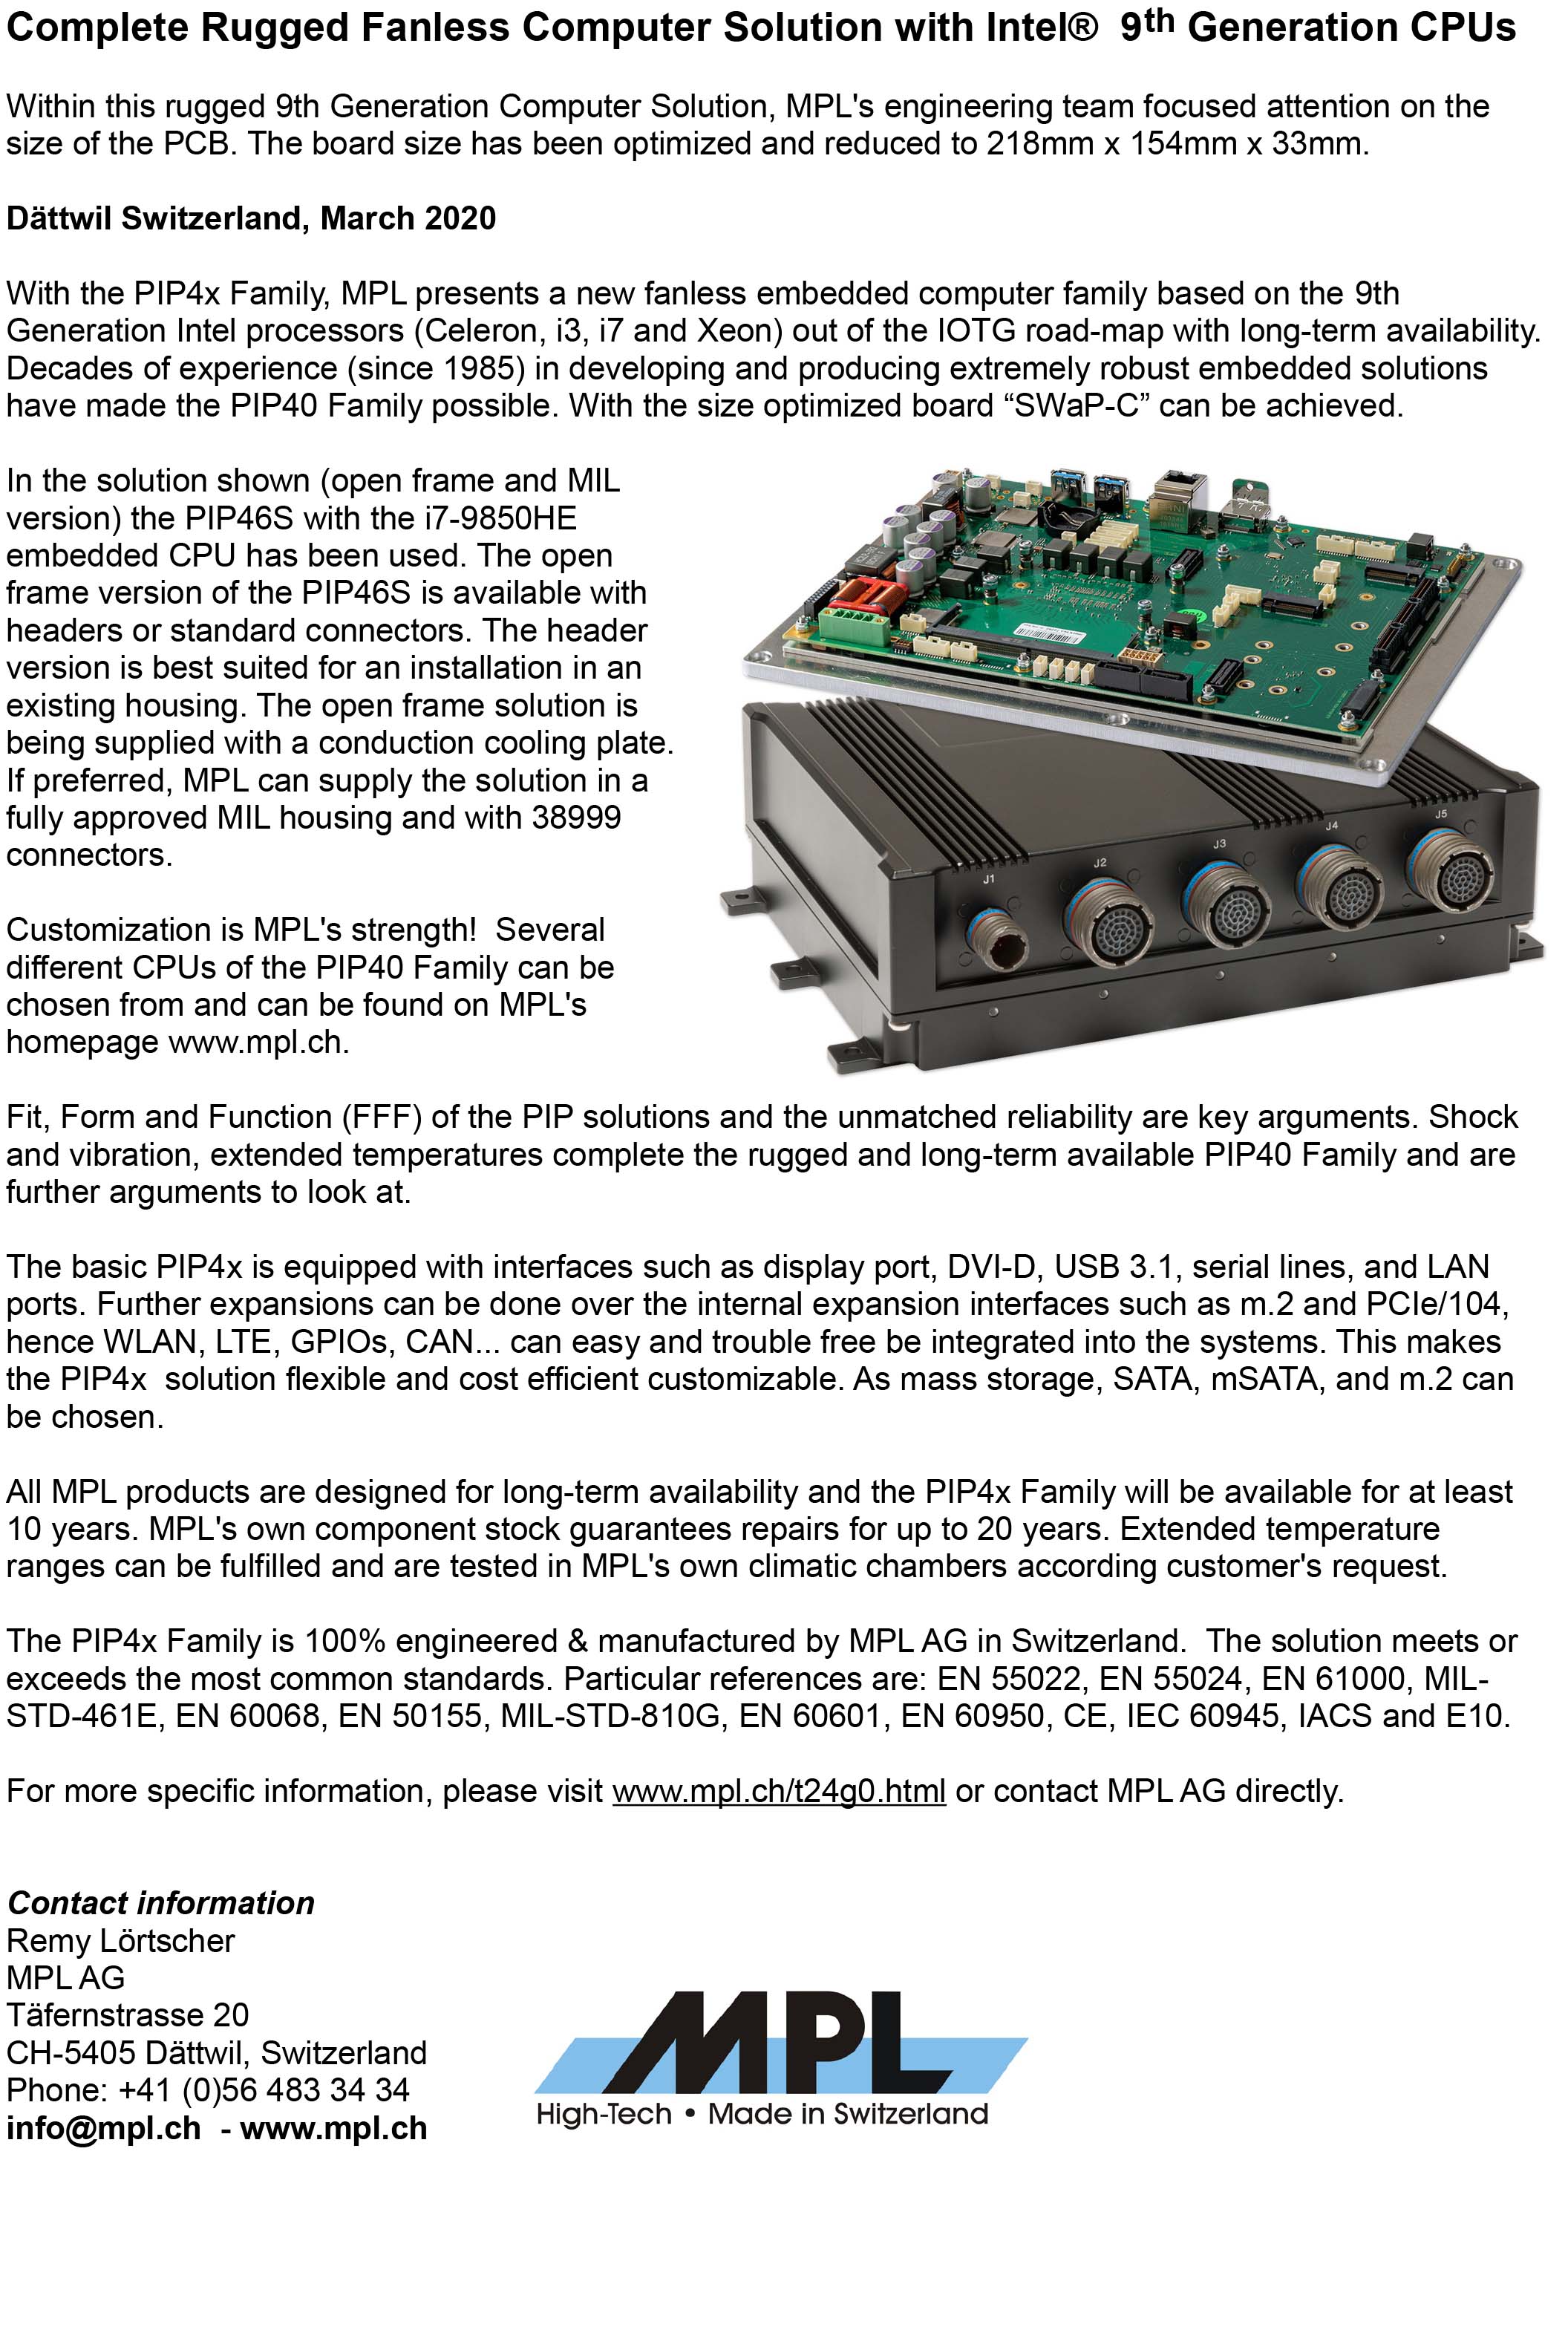 PIP4xS Rugged Fanless Computer Solution with 9th Gen CPU